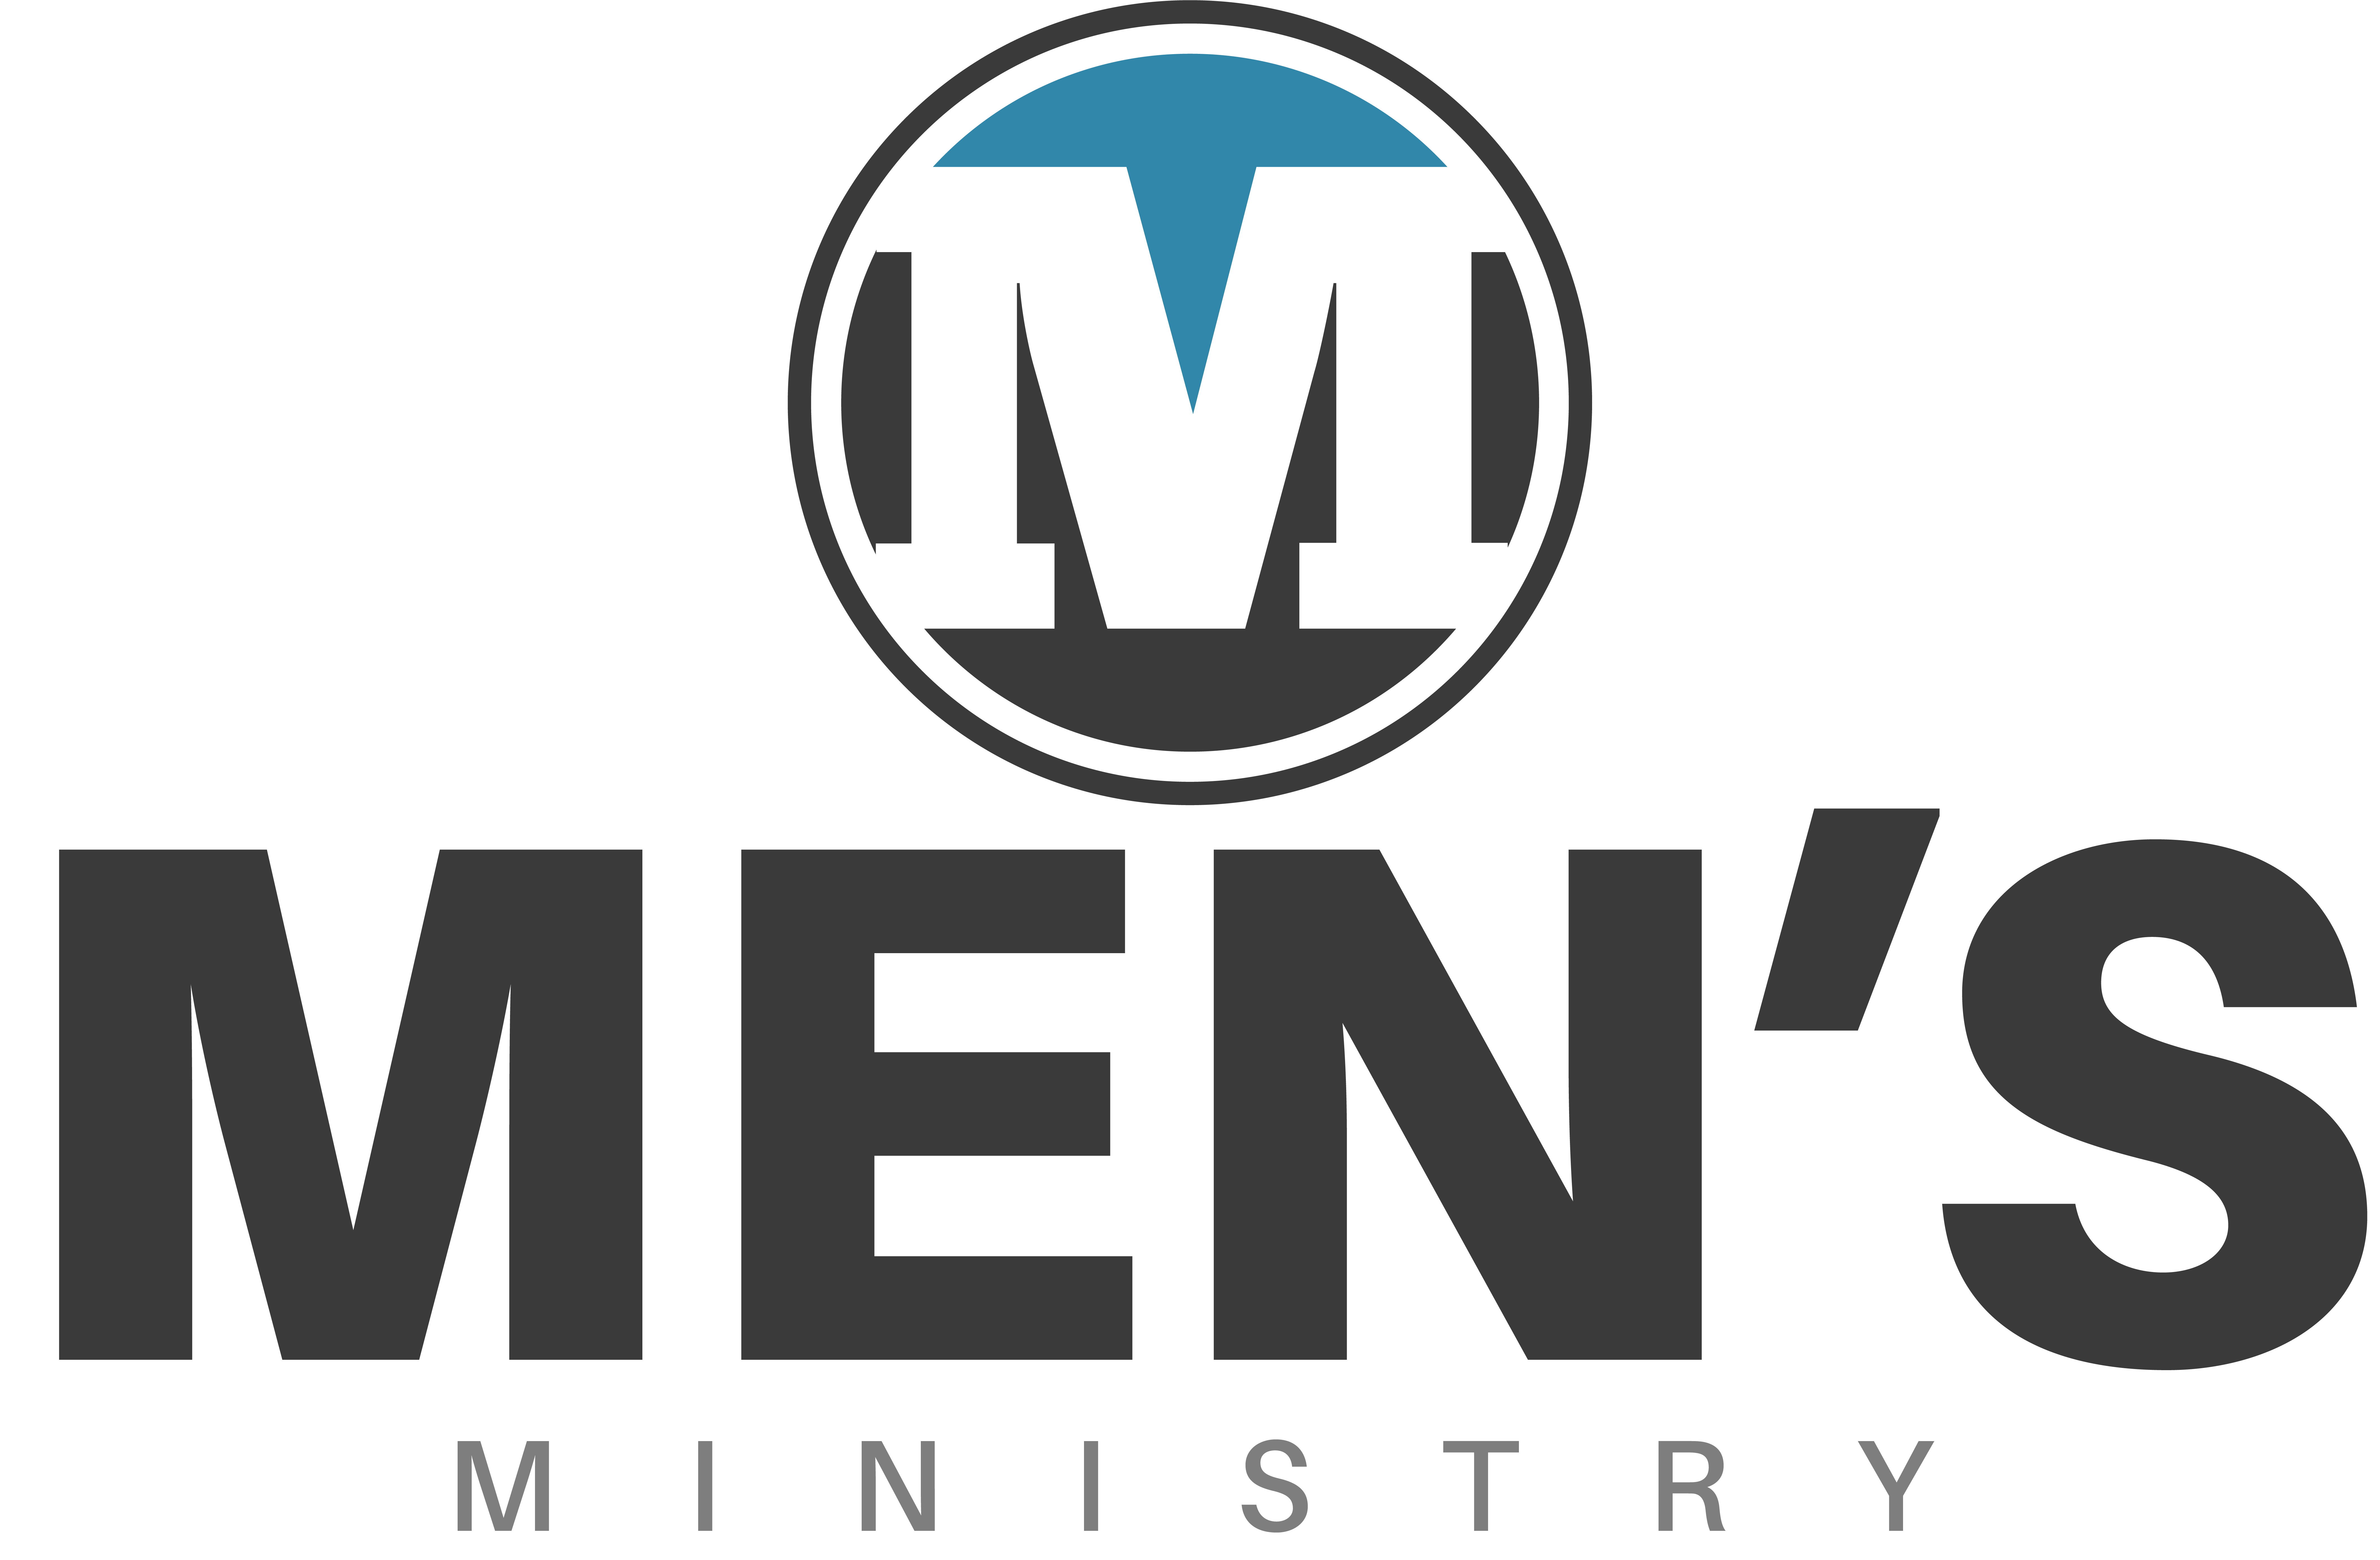 This is a picture of the Men's Ministry logo